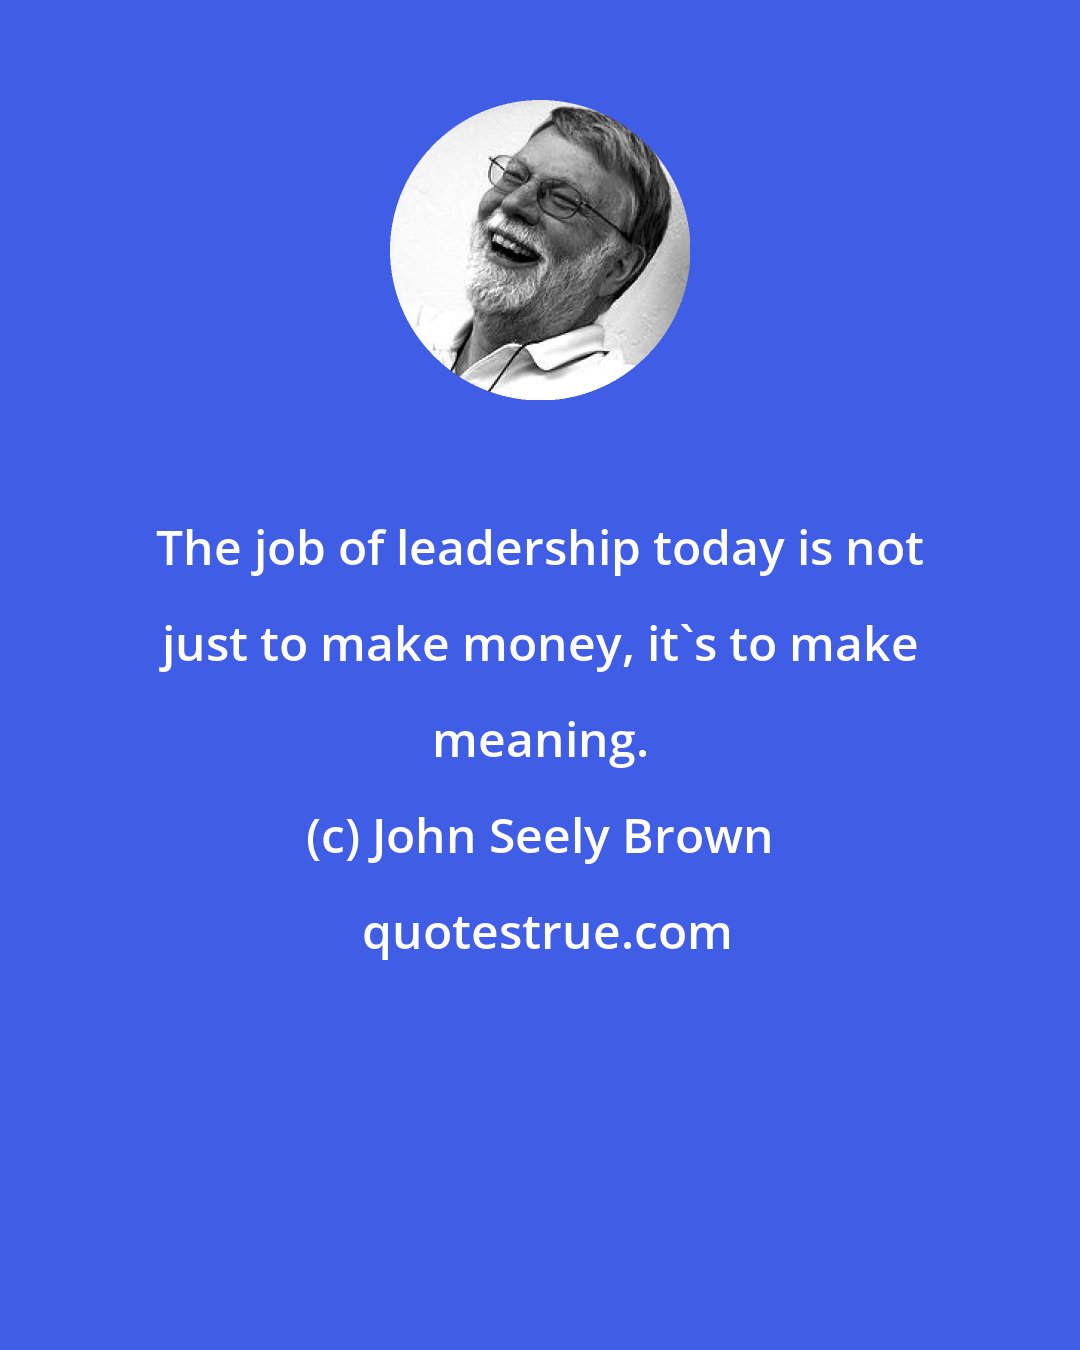 John Seely Brown: The job of leadership today is not just to make money, it's to make meaning.